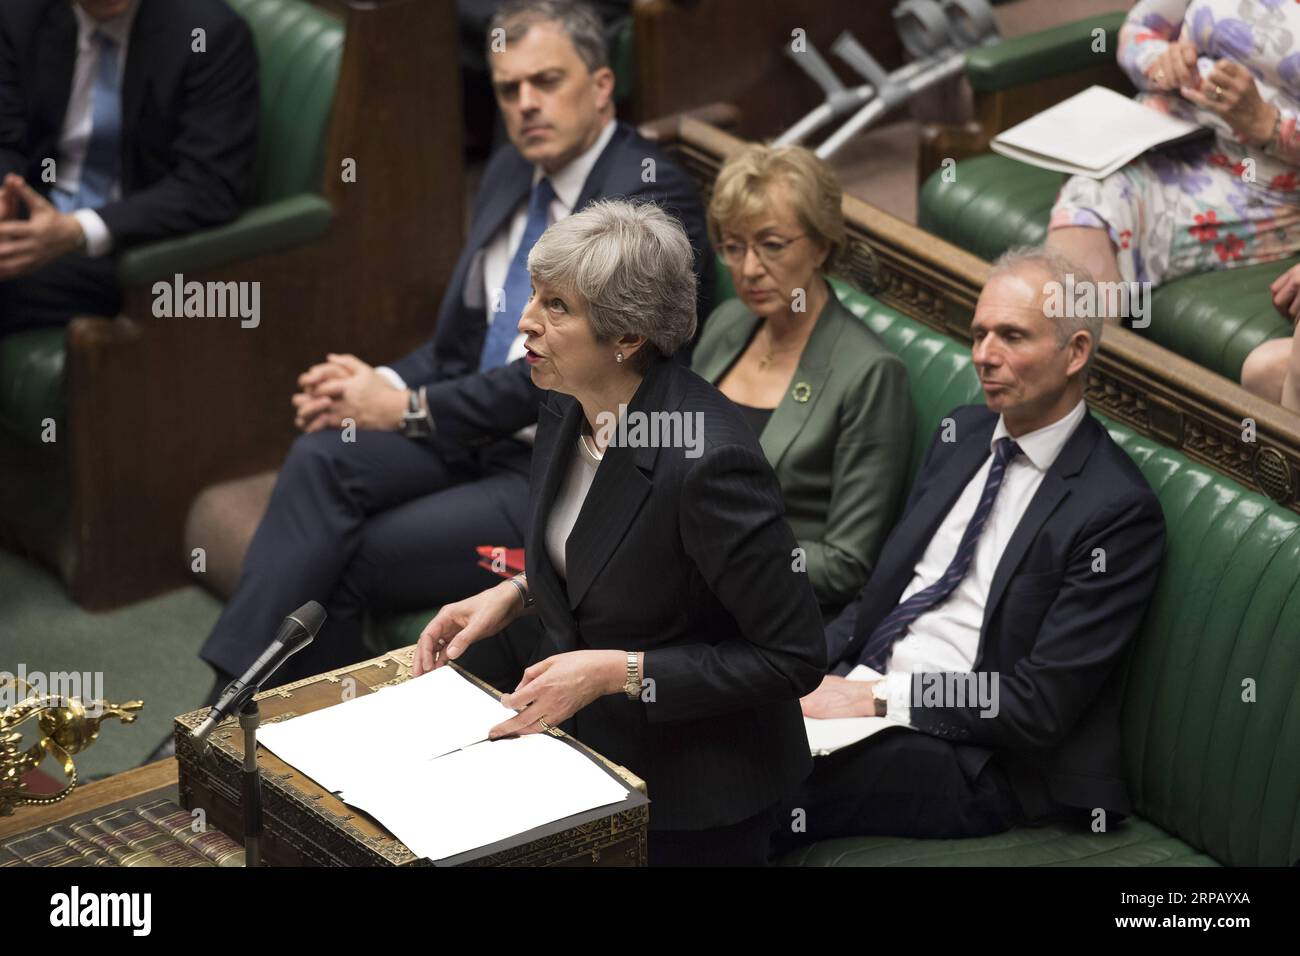 (190522) -- LONDON, May 22, 2019 -- British Prime Minister Theresa May (front) and the leader of the House of Commons Andrea Leadsom (2nd R, rear) attend the Prime Minister s Questions at the House of Commons in London, Britain, on May 22, 2019. The British leader of the House of Commons Andrea Leadsom on Wednesday resigned amid growing discontent with the prime minster s leadership, one day after the new Brexit agreement backfired. ) HOC MANDATORY CREDIT: BRITAIN-LONDON-HOUSE OF COMMONS-LEADER-RESIGNATION UKxParliament/JessicaxTaylor PUBLICATIONxNOTxINxCHN Stock Photo